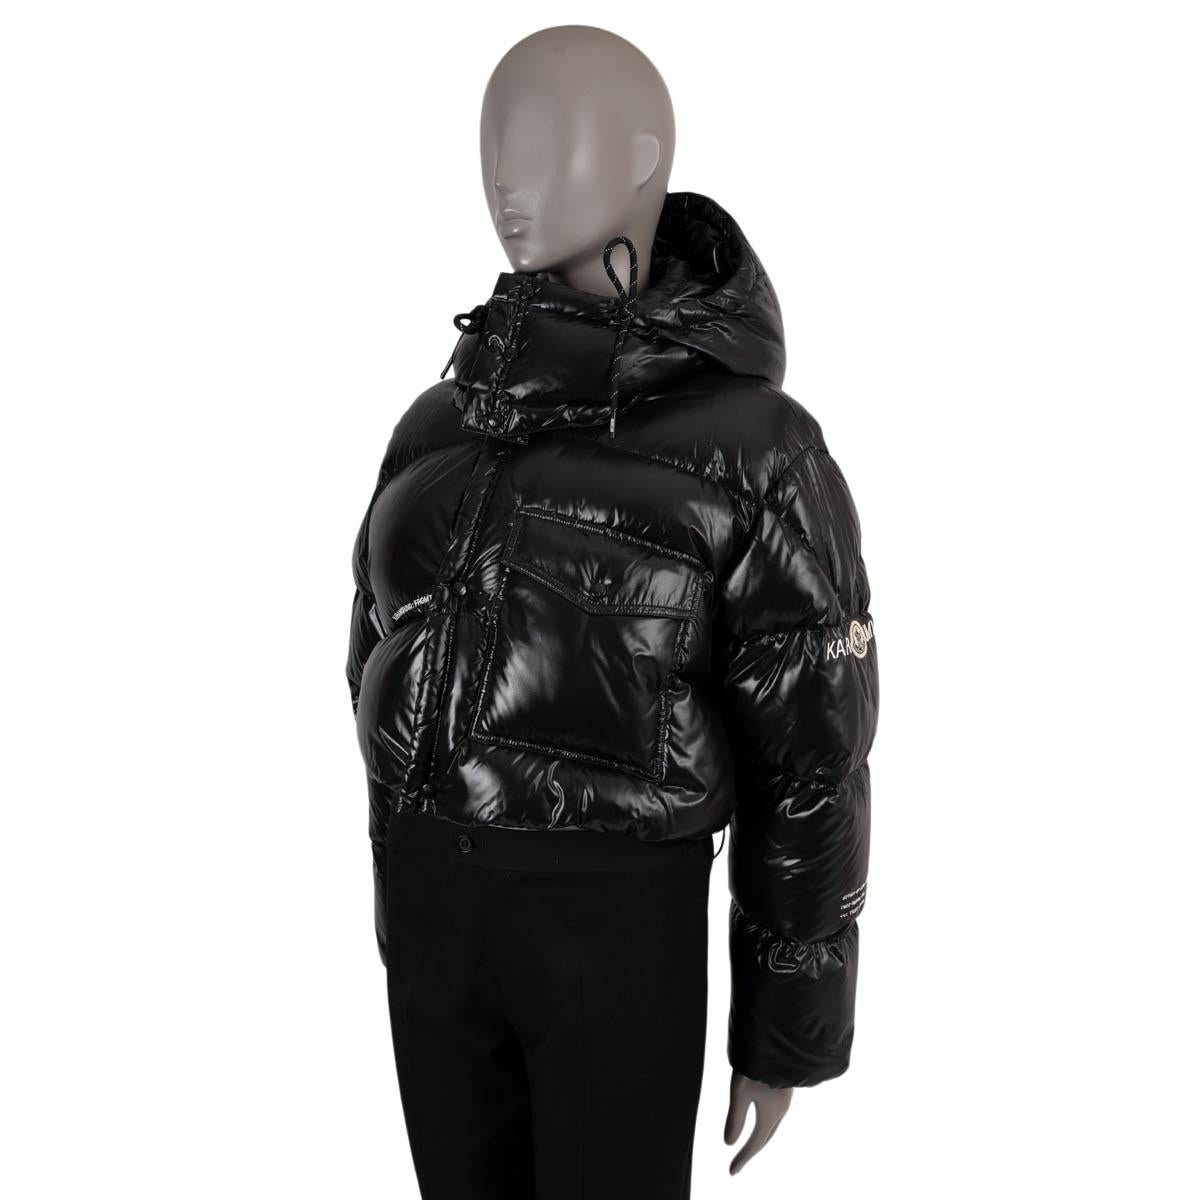 100% authentic Moncler Genius x FRGMT Irvinie down puffer jacket in black shiny satin polyamide (100%). Features a drawstring hood, stand-up collar, a flap pocket on the front, drawstring bottom hem and inset elastic cuffs. Opens with a two-way